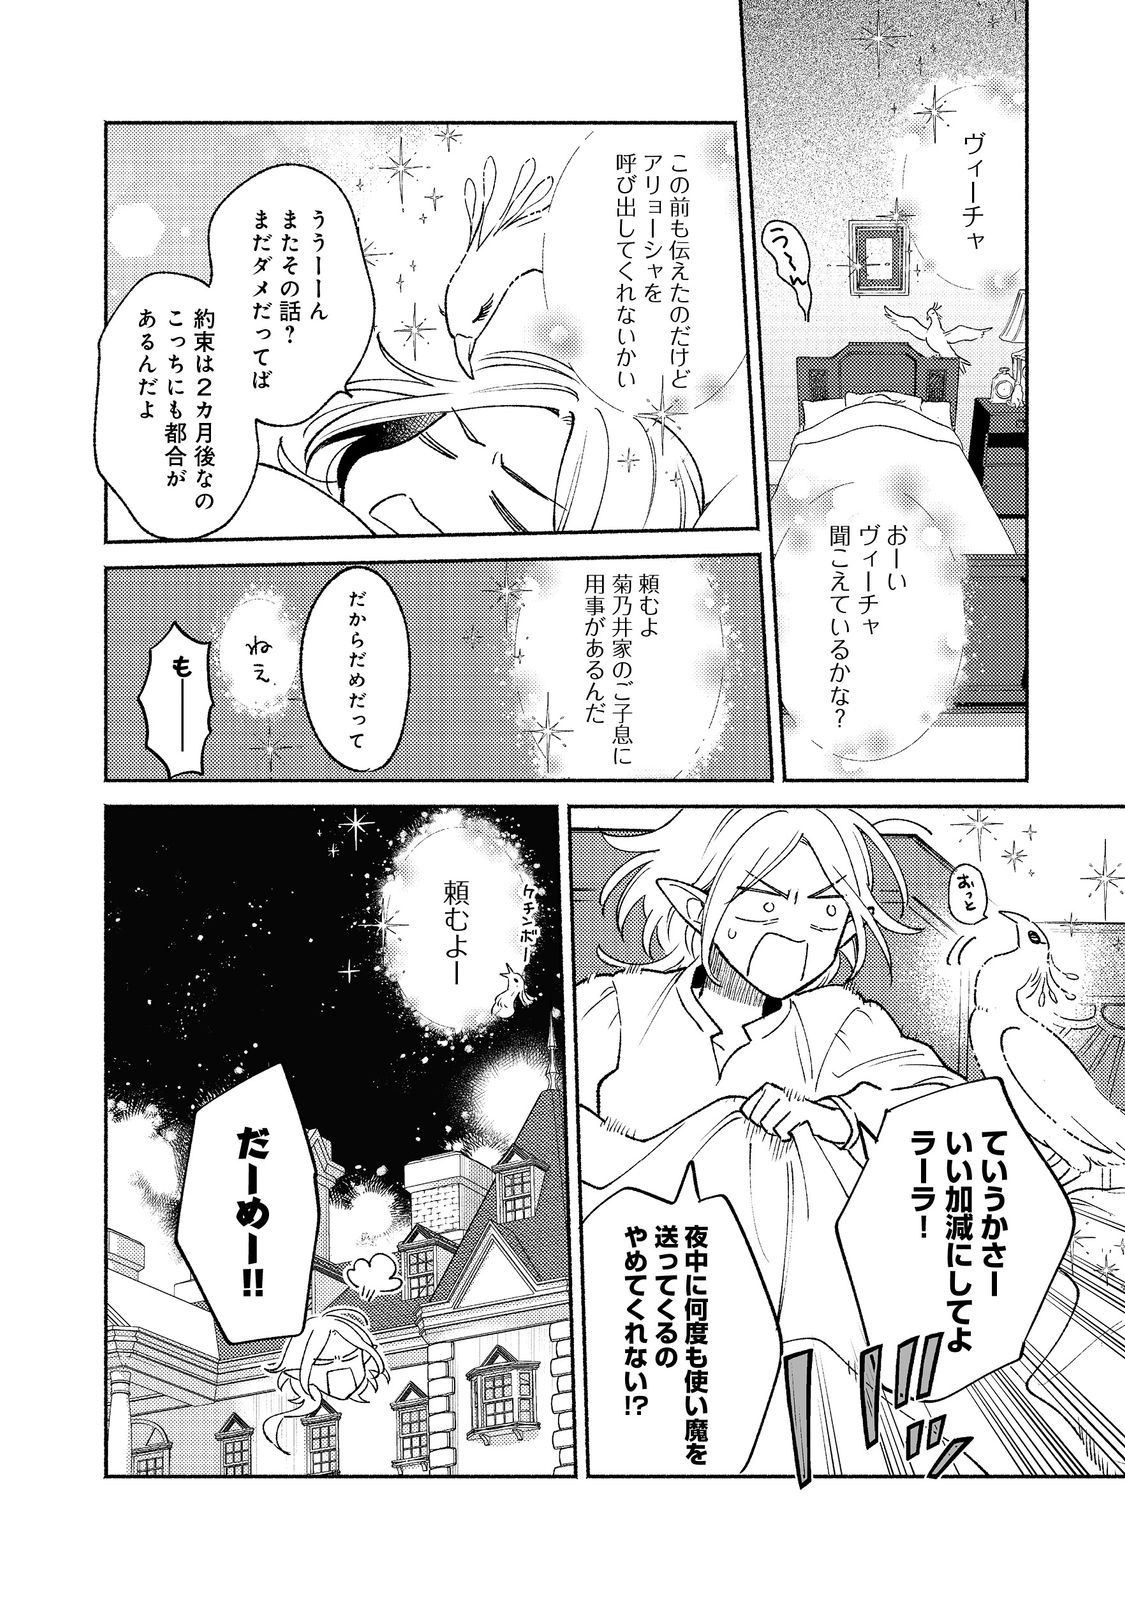 I’m the White Pig Nobleman 第16.2話 - Page 16